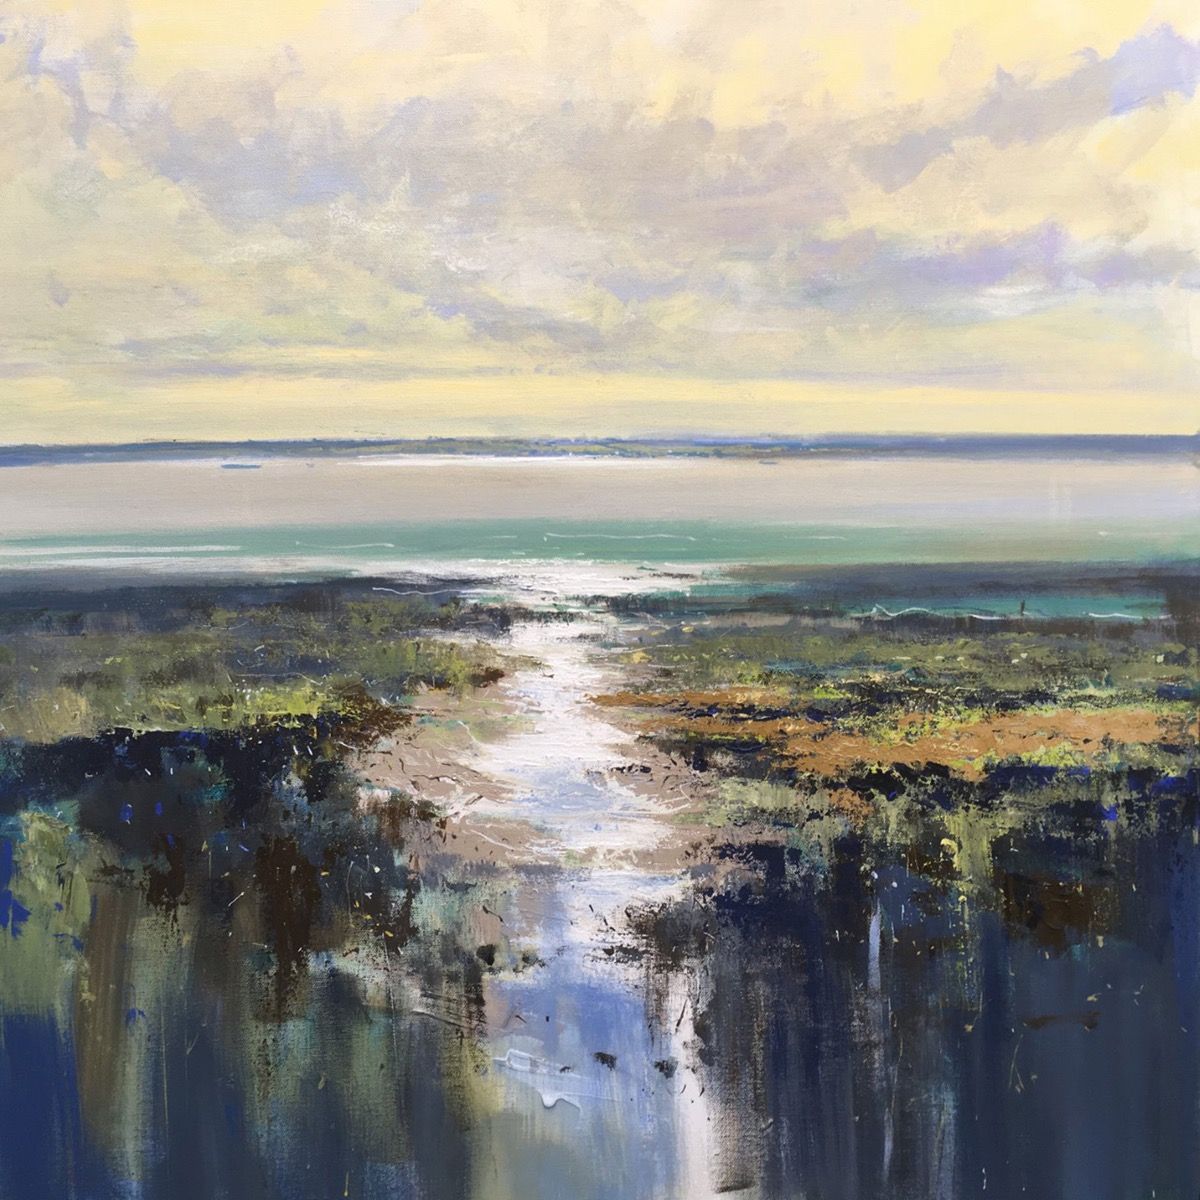 Late Afternoon in the Estuary by Jonathan Trim